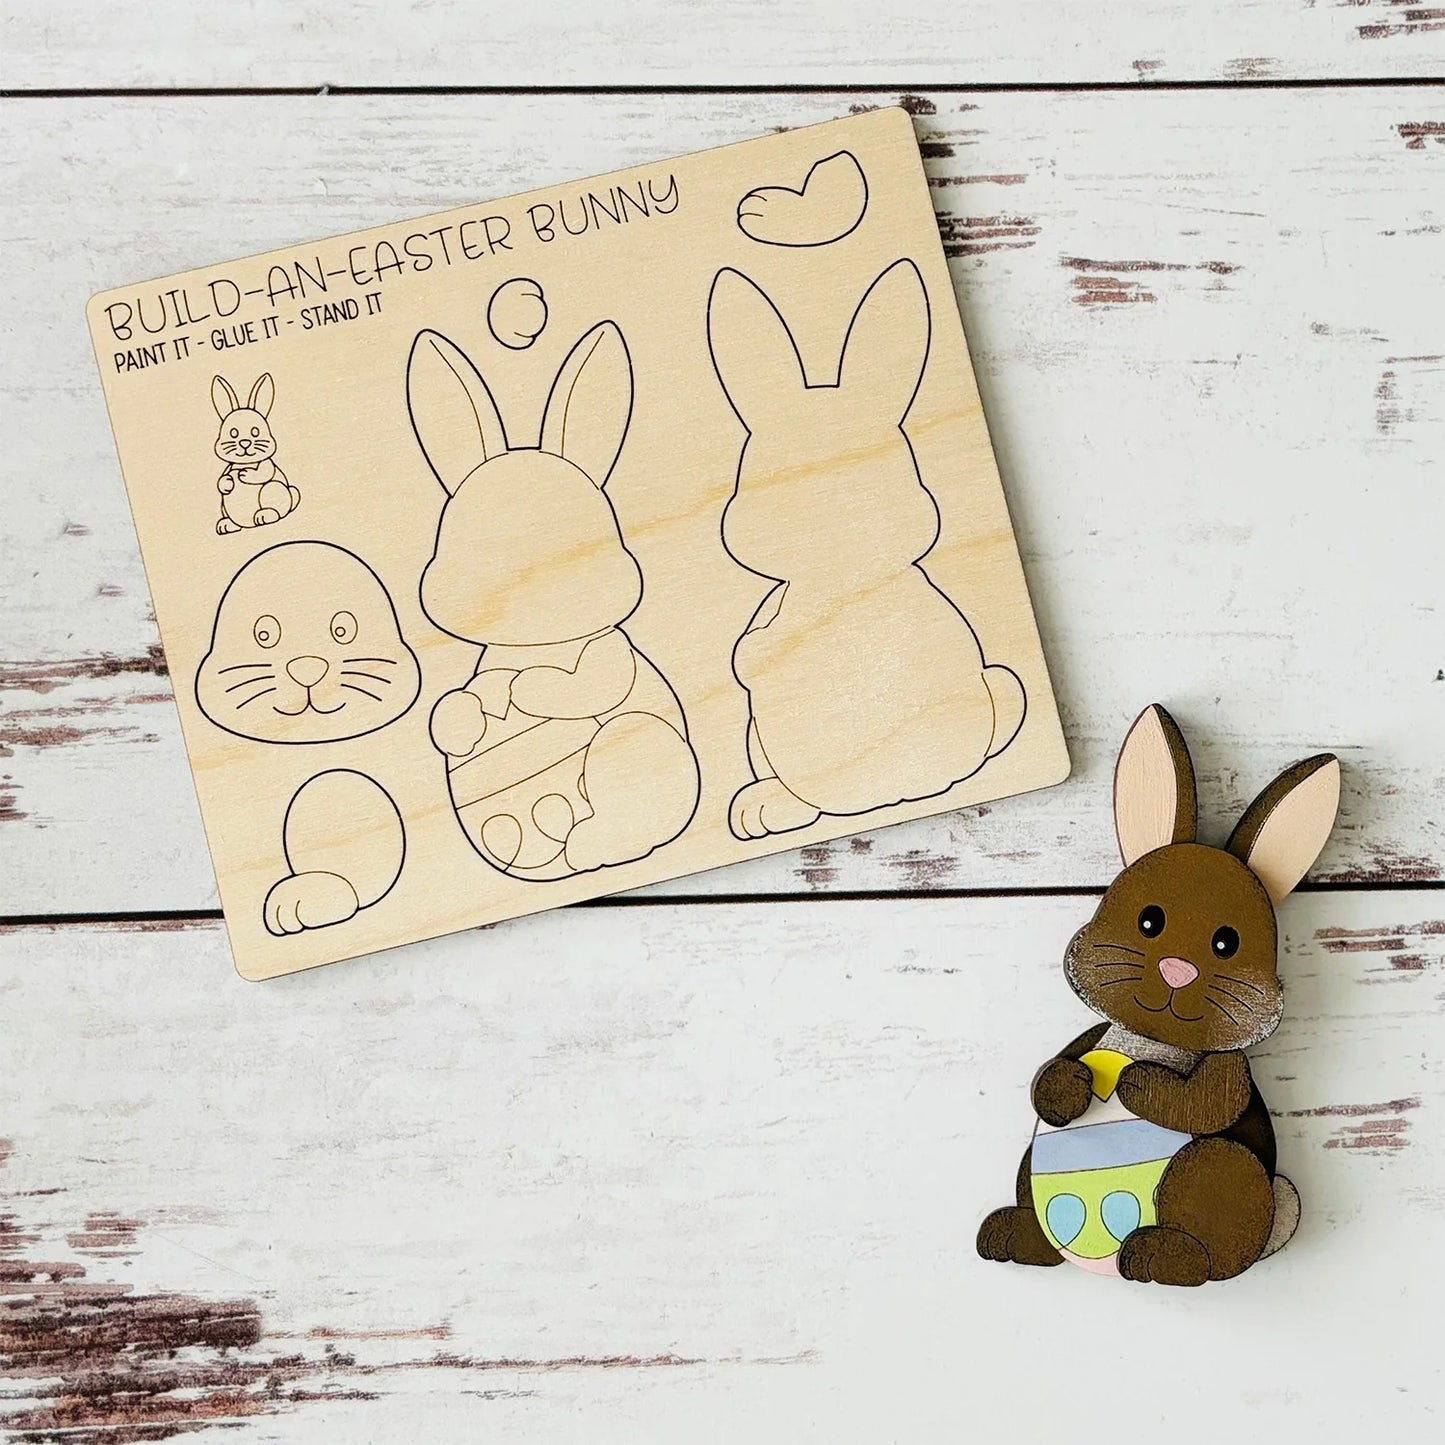  Introducing our Easter Friends Pop Out Cards - an engaging and delightful kids' activity! Choose from Bunny, Lamb, and Chick designs. The DIY cards are perfect for painting and gluing together. Once completed, these charming characters can be stood up, doubling as adorable Easter decorations. Encourage creativity and make this Easter unforgettable for your little ones!